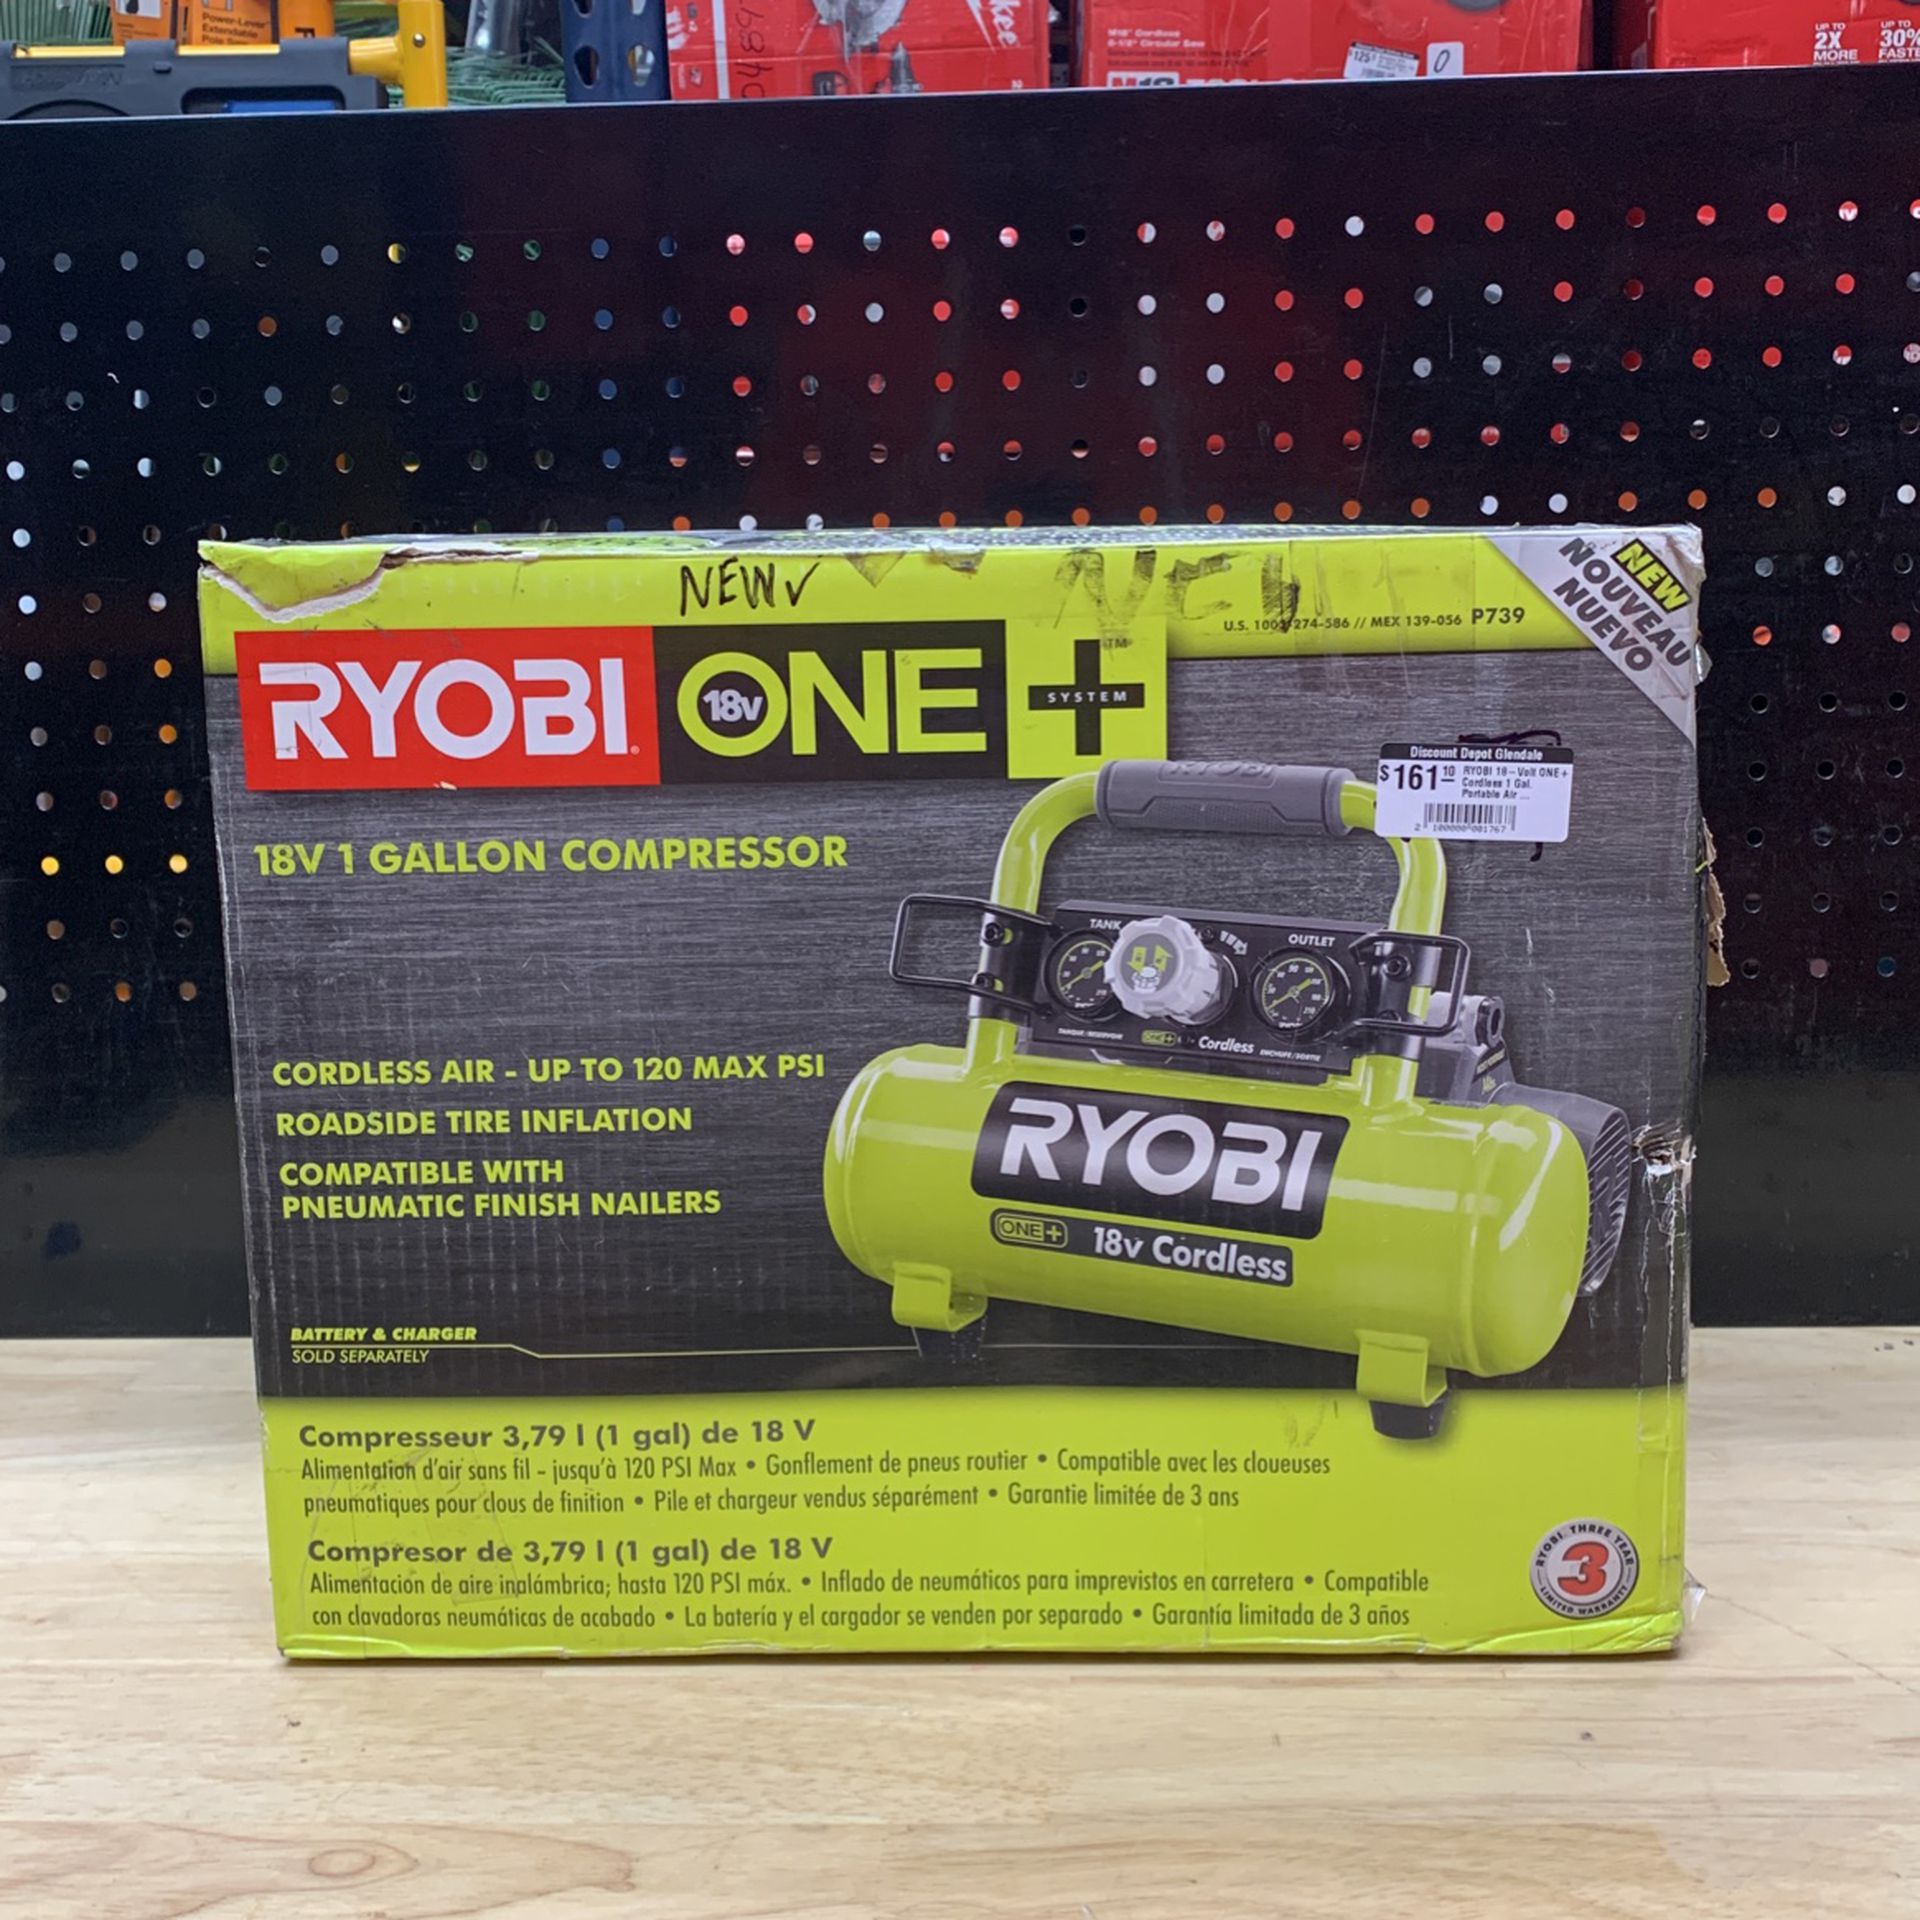 RYOBI ONE+ 18V Cordless Air Compressor (Tool Only) for Sale in Phoenix, AZ - OfferUp